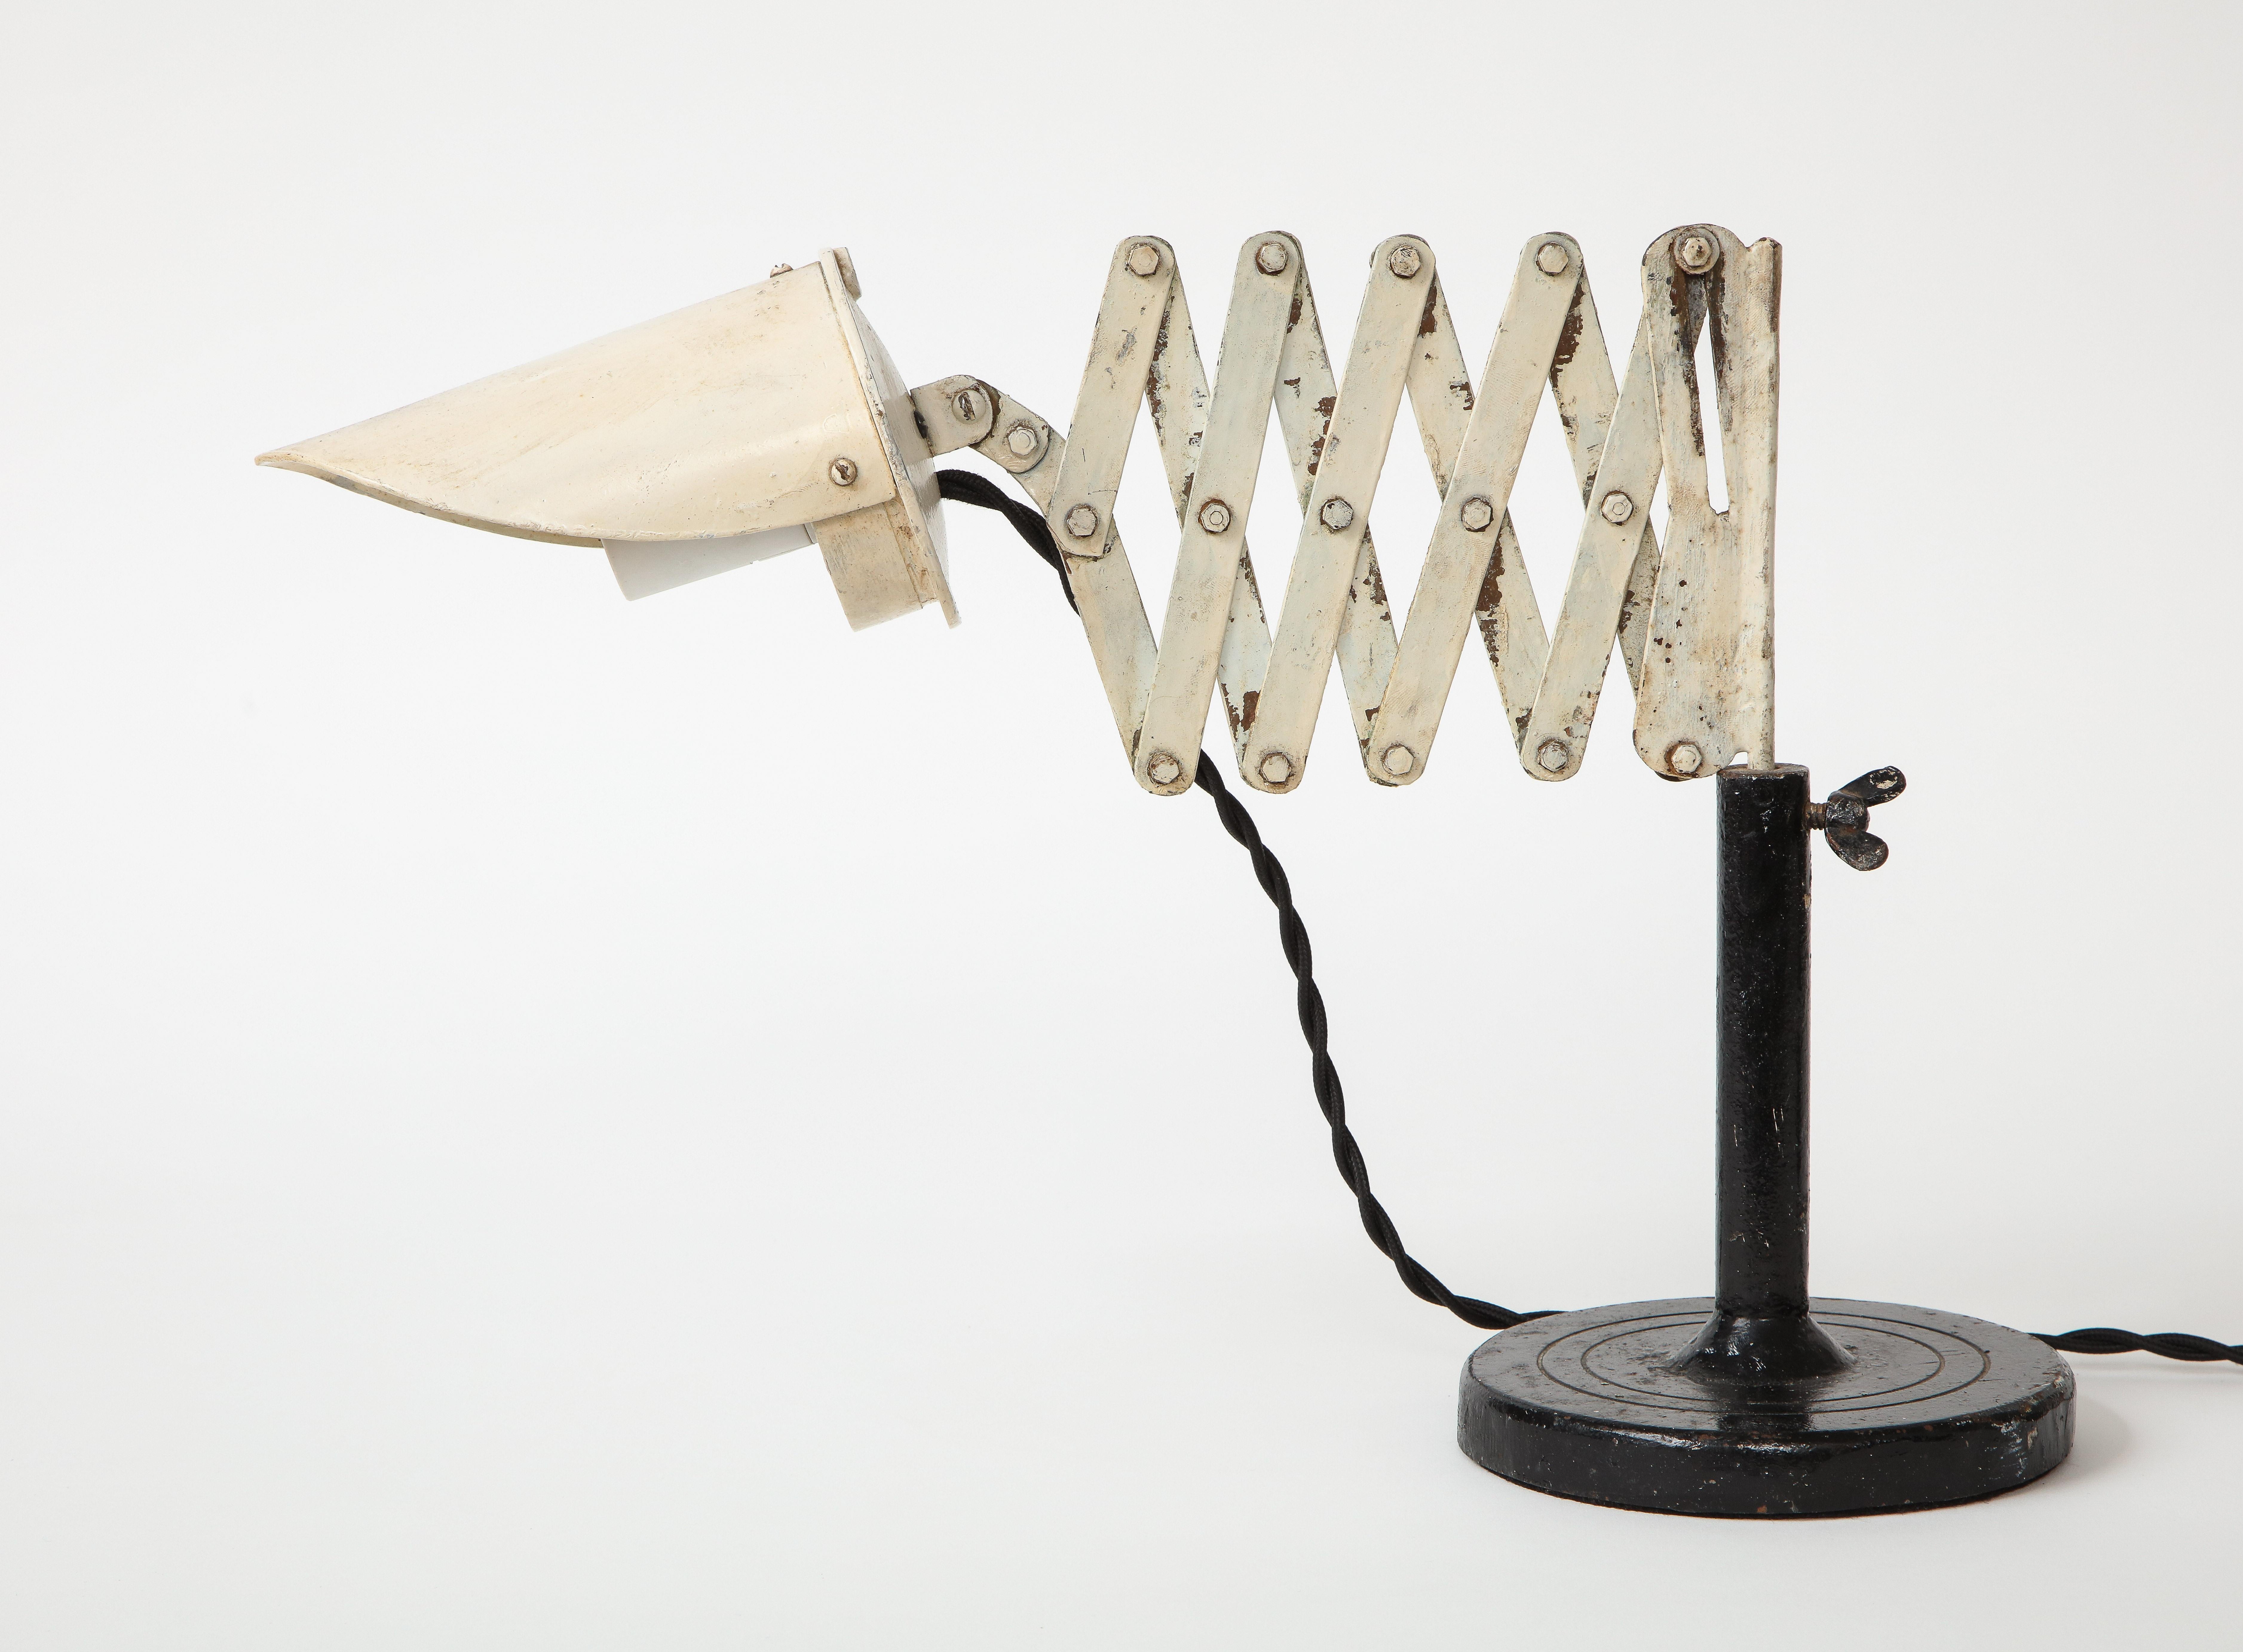 Vintage industrial metal scissor table lamp, circa 20th century. 

Lamp consists of a round base, adjustable cylindrical body, and accordion arm that extends to various lengths. The scissor lamp design was introduced in the 1930s and is a perfect